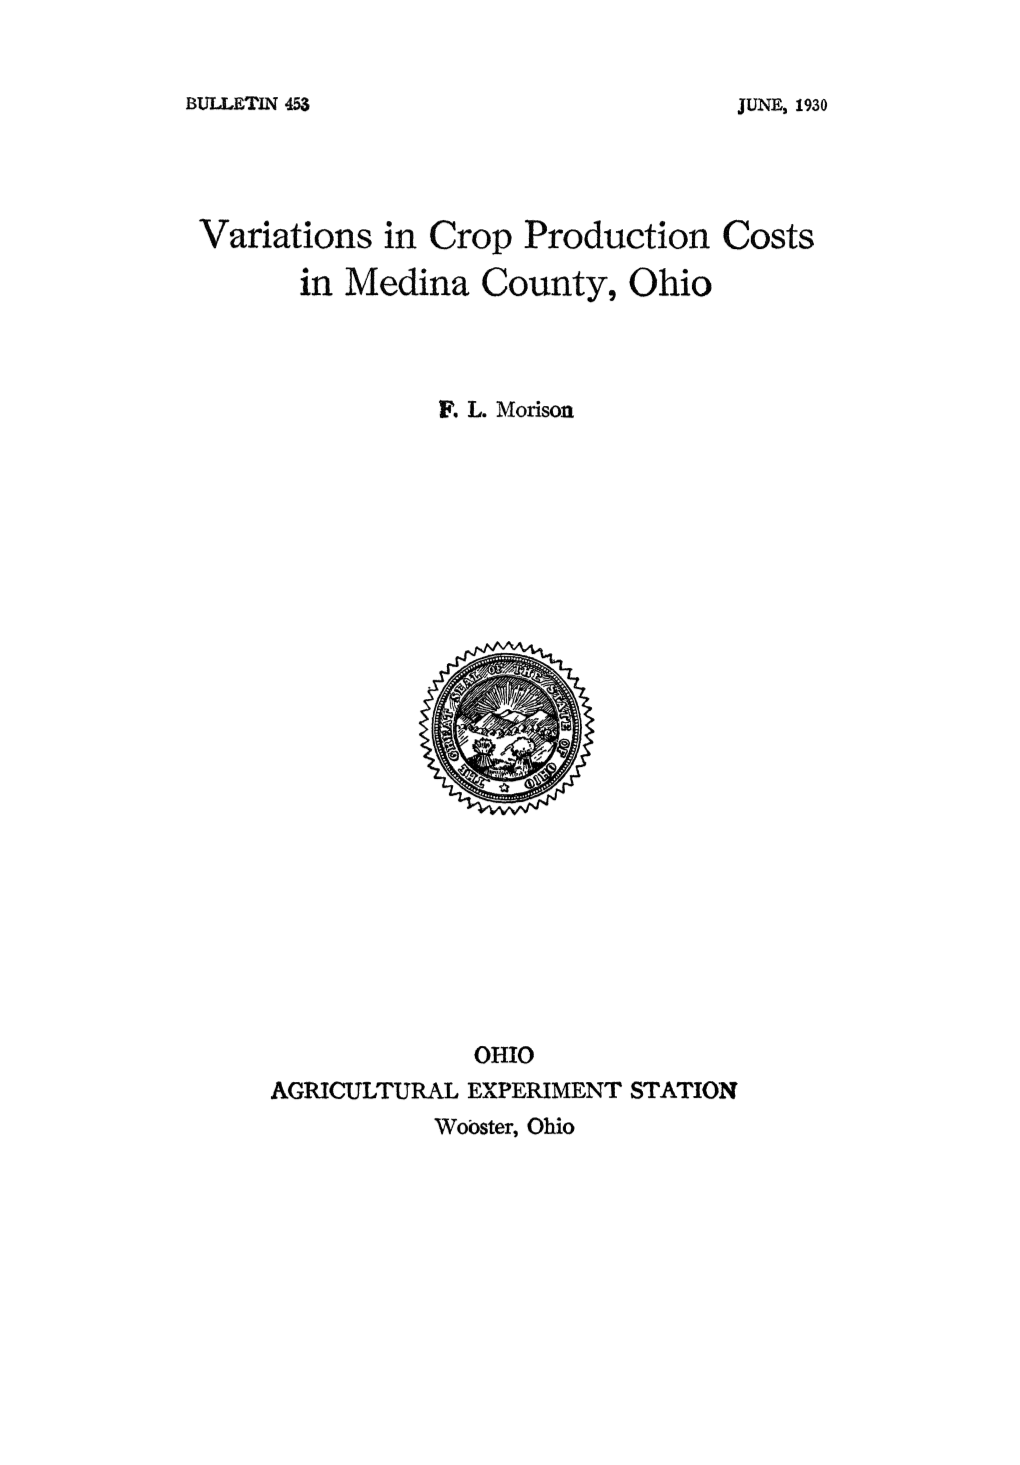 Variations in Crop Production Costs in Medina County, Ohio